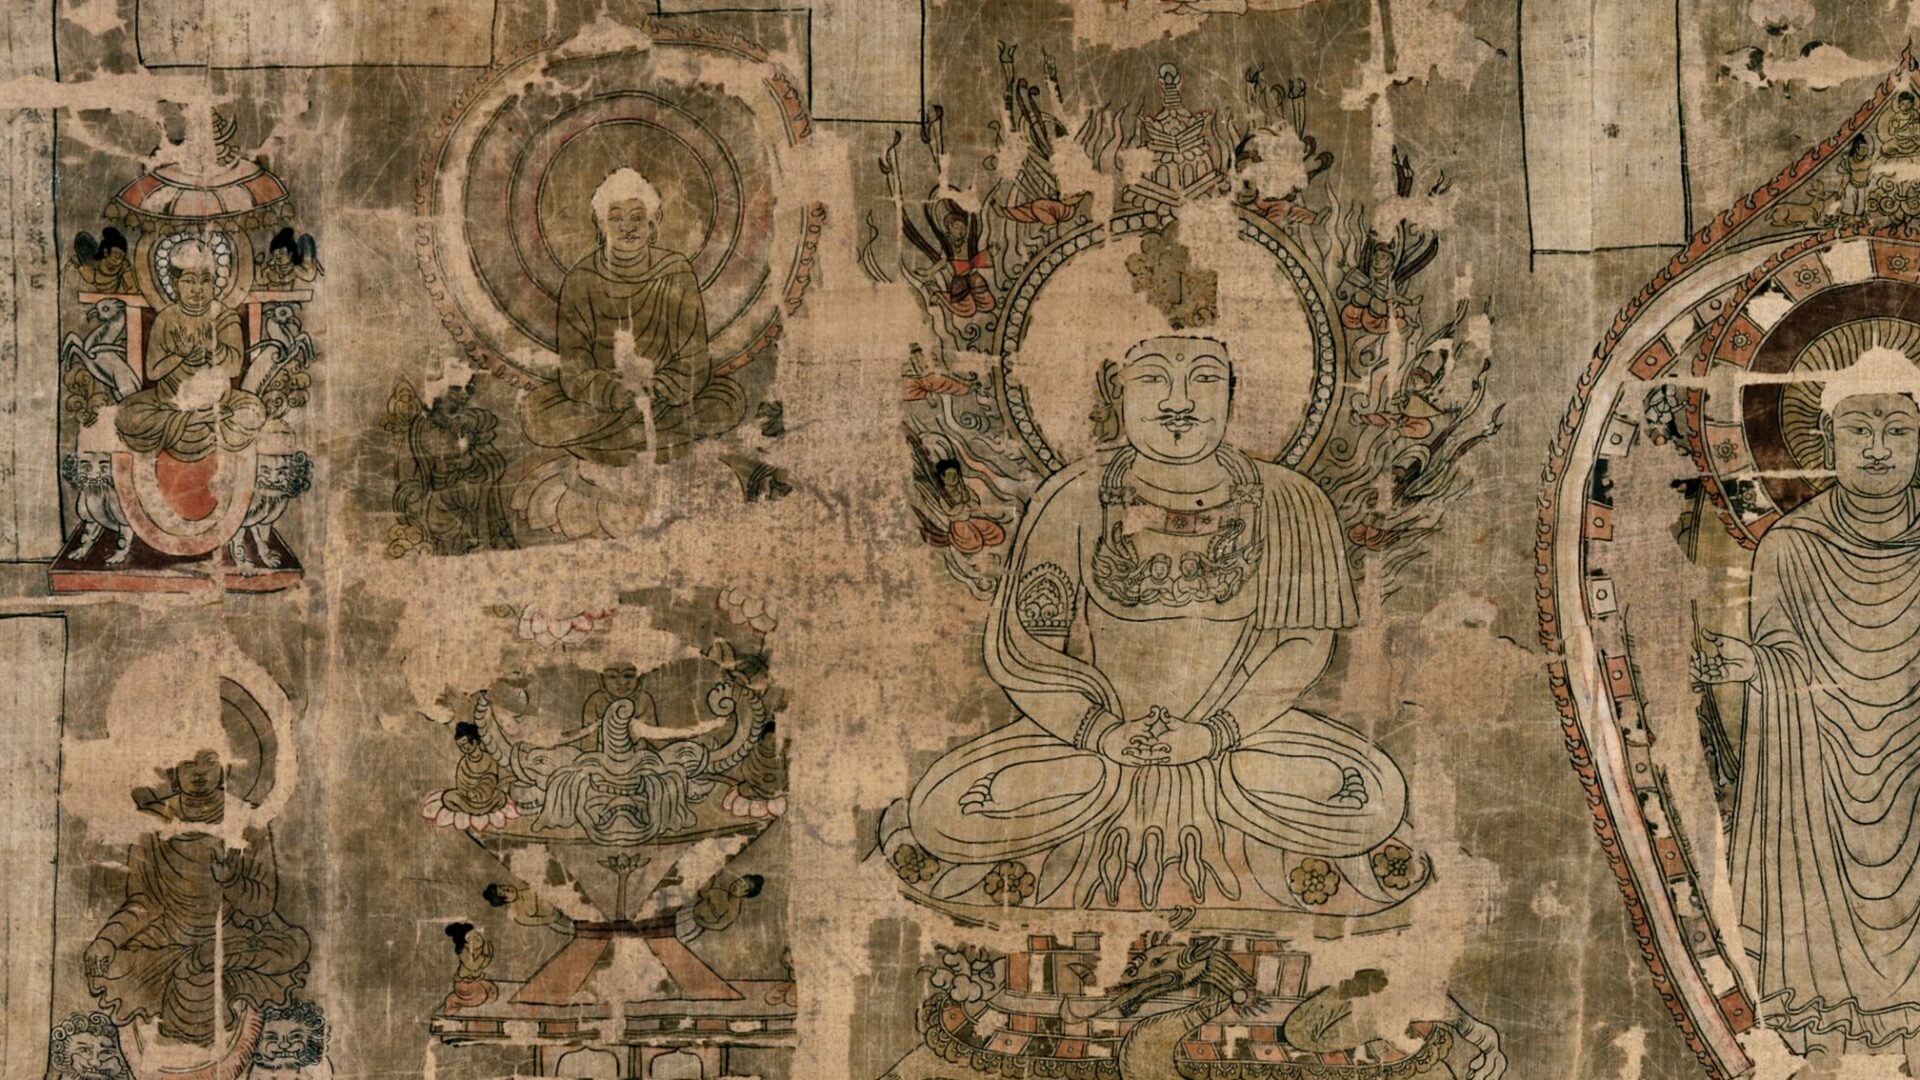 Section from a virtual reconstruction of fragments from a silk painting known as Famous images of the Buddha.